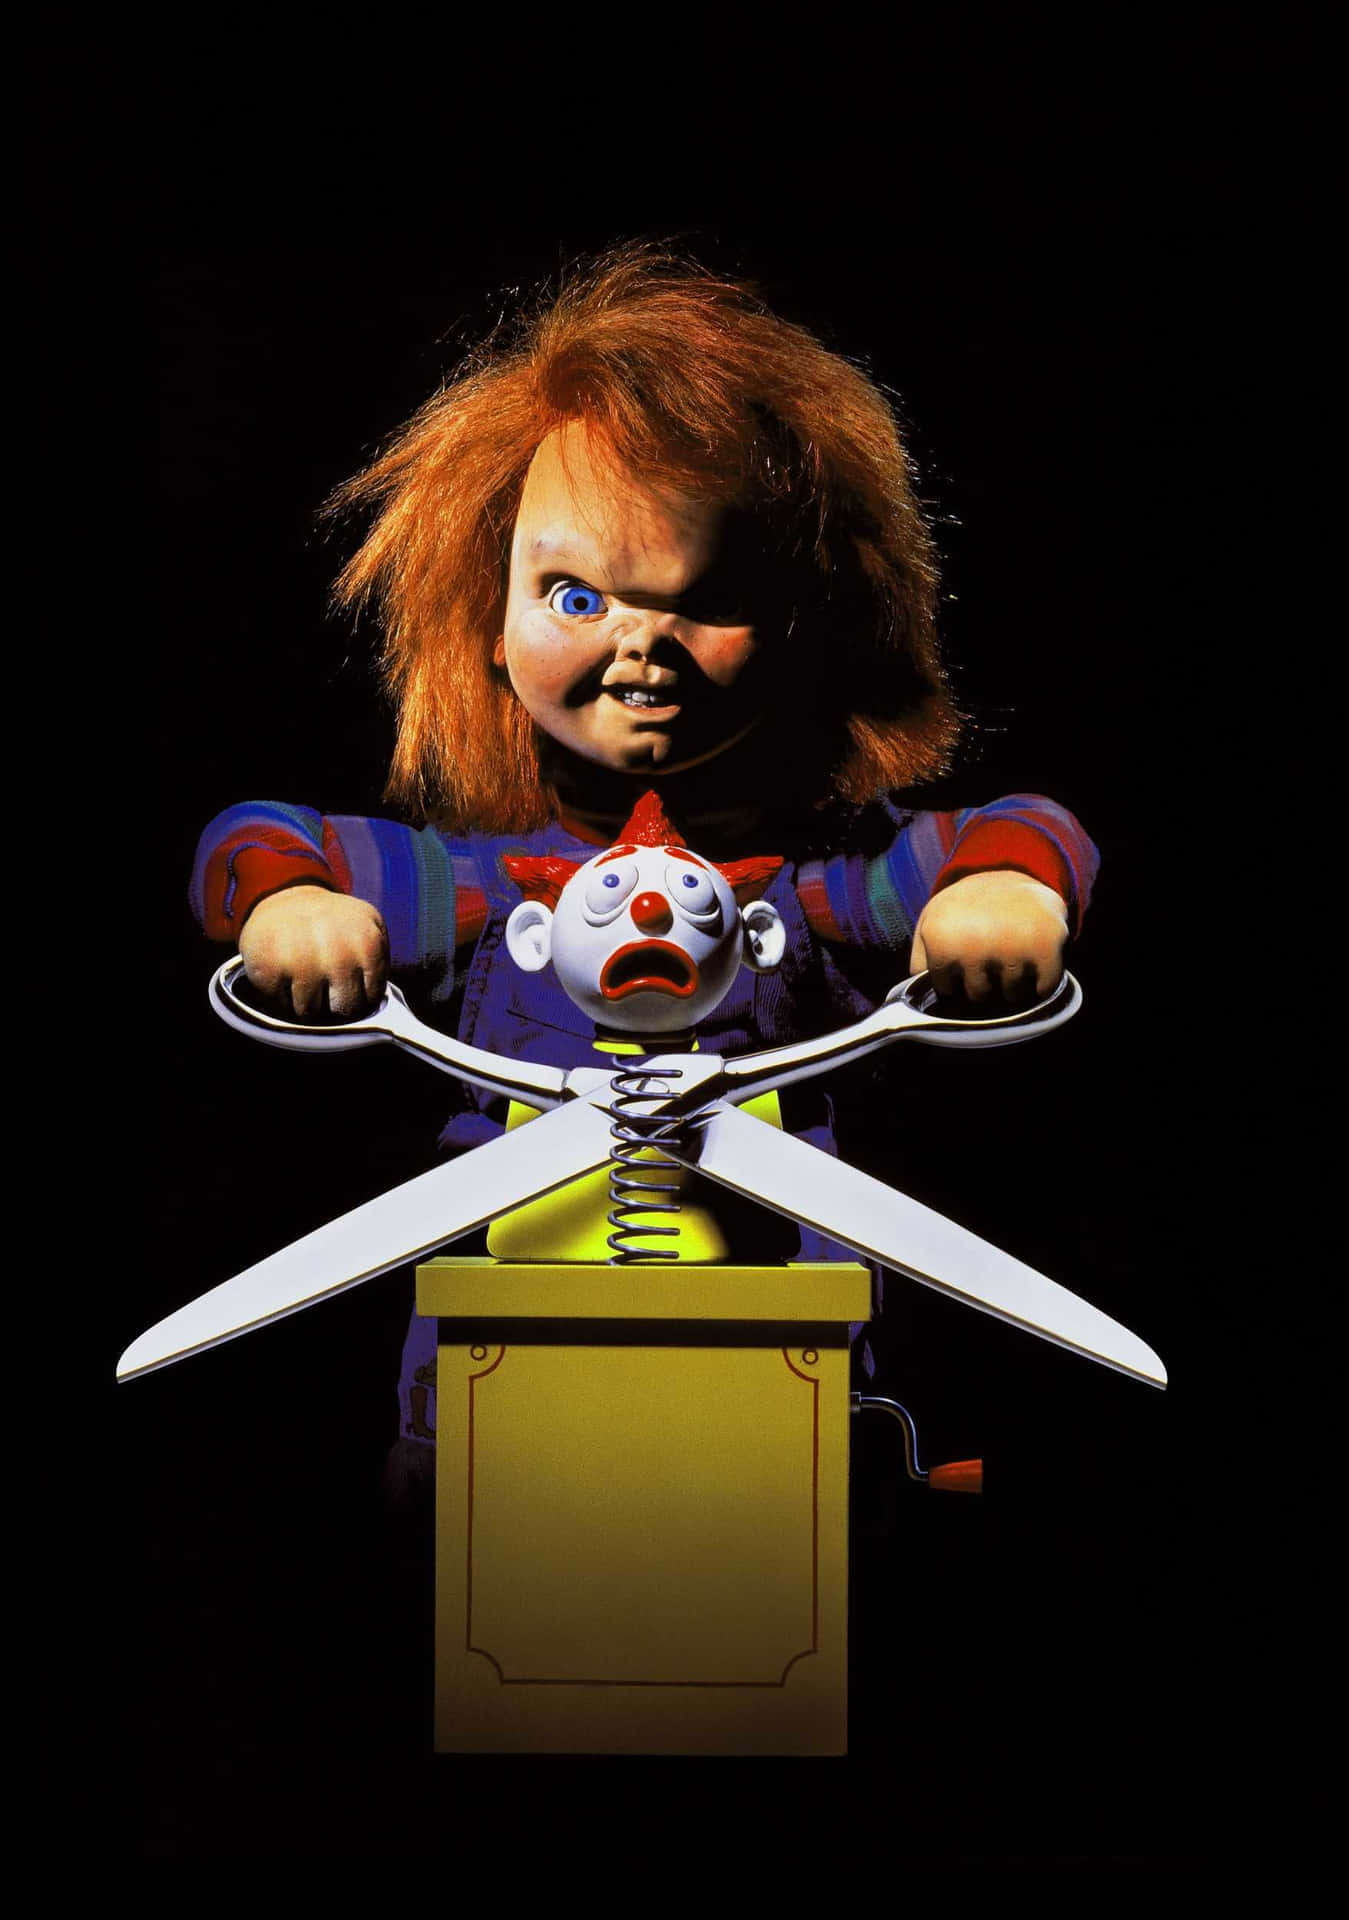 Chucky, the sinister living doll and cult classic horror character